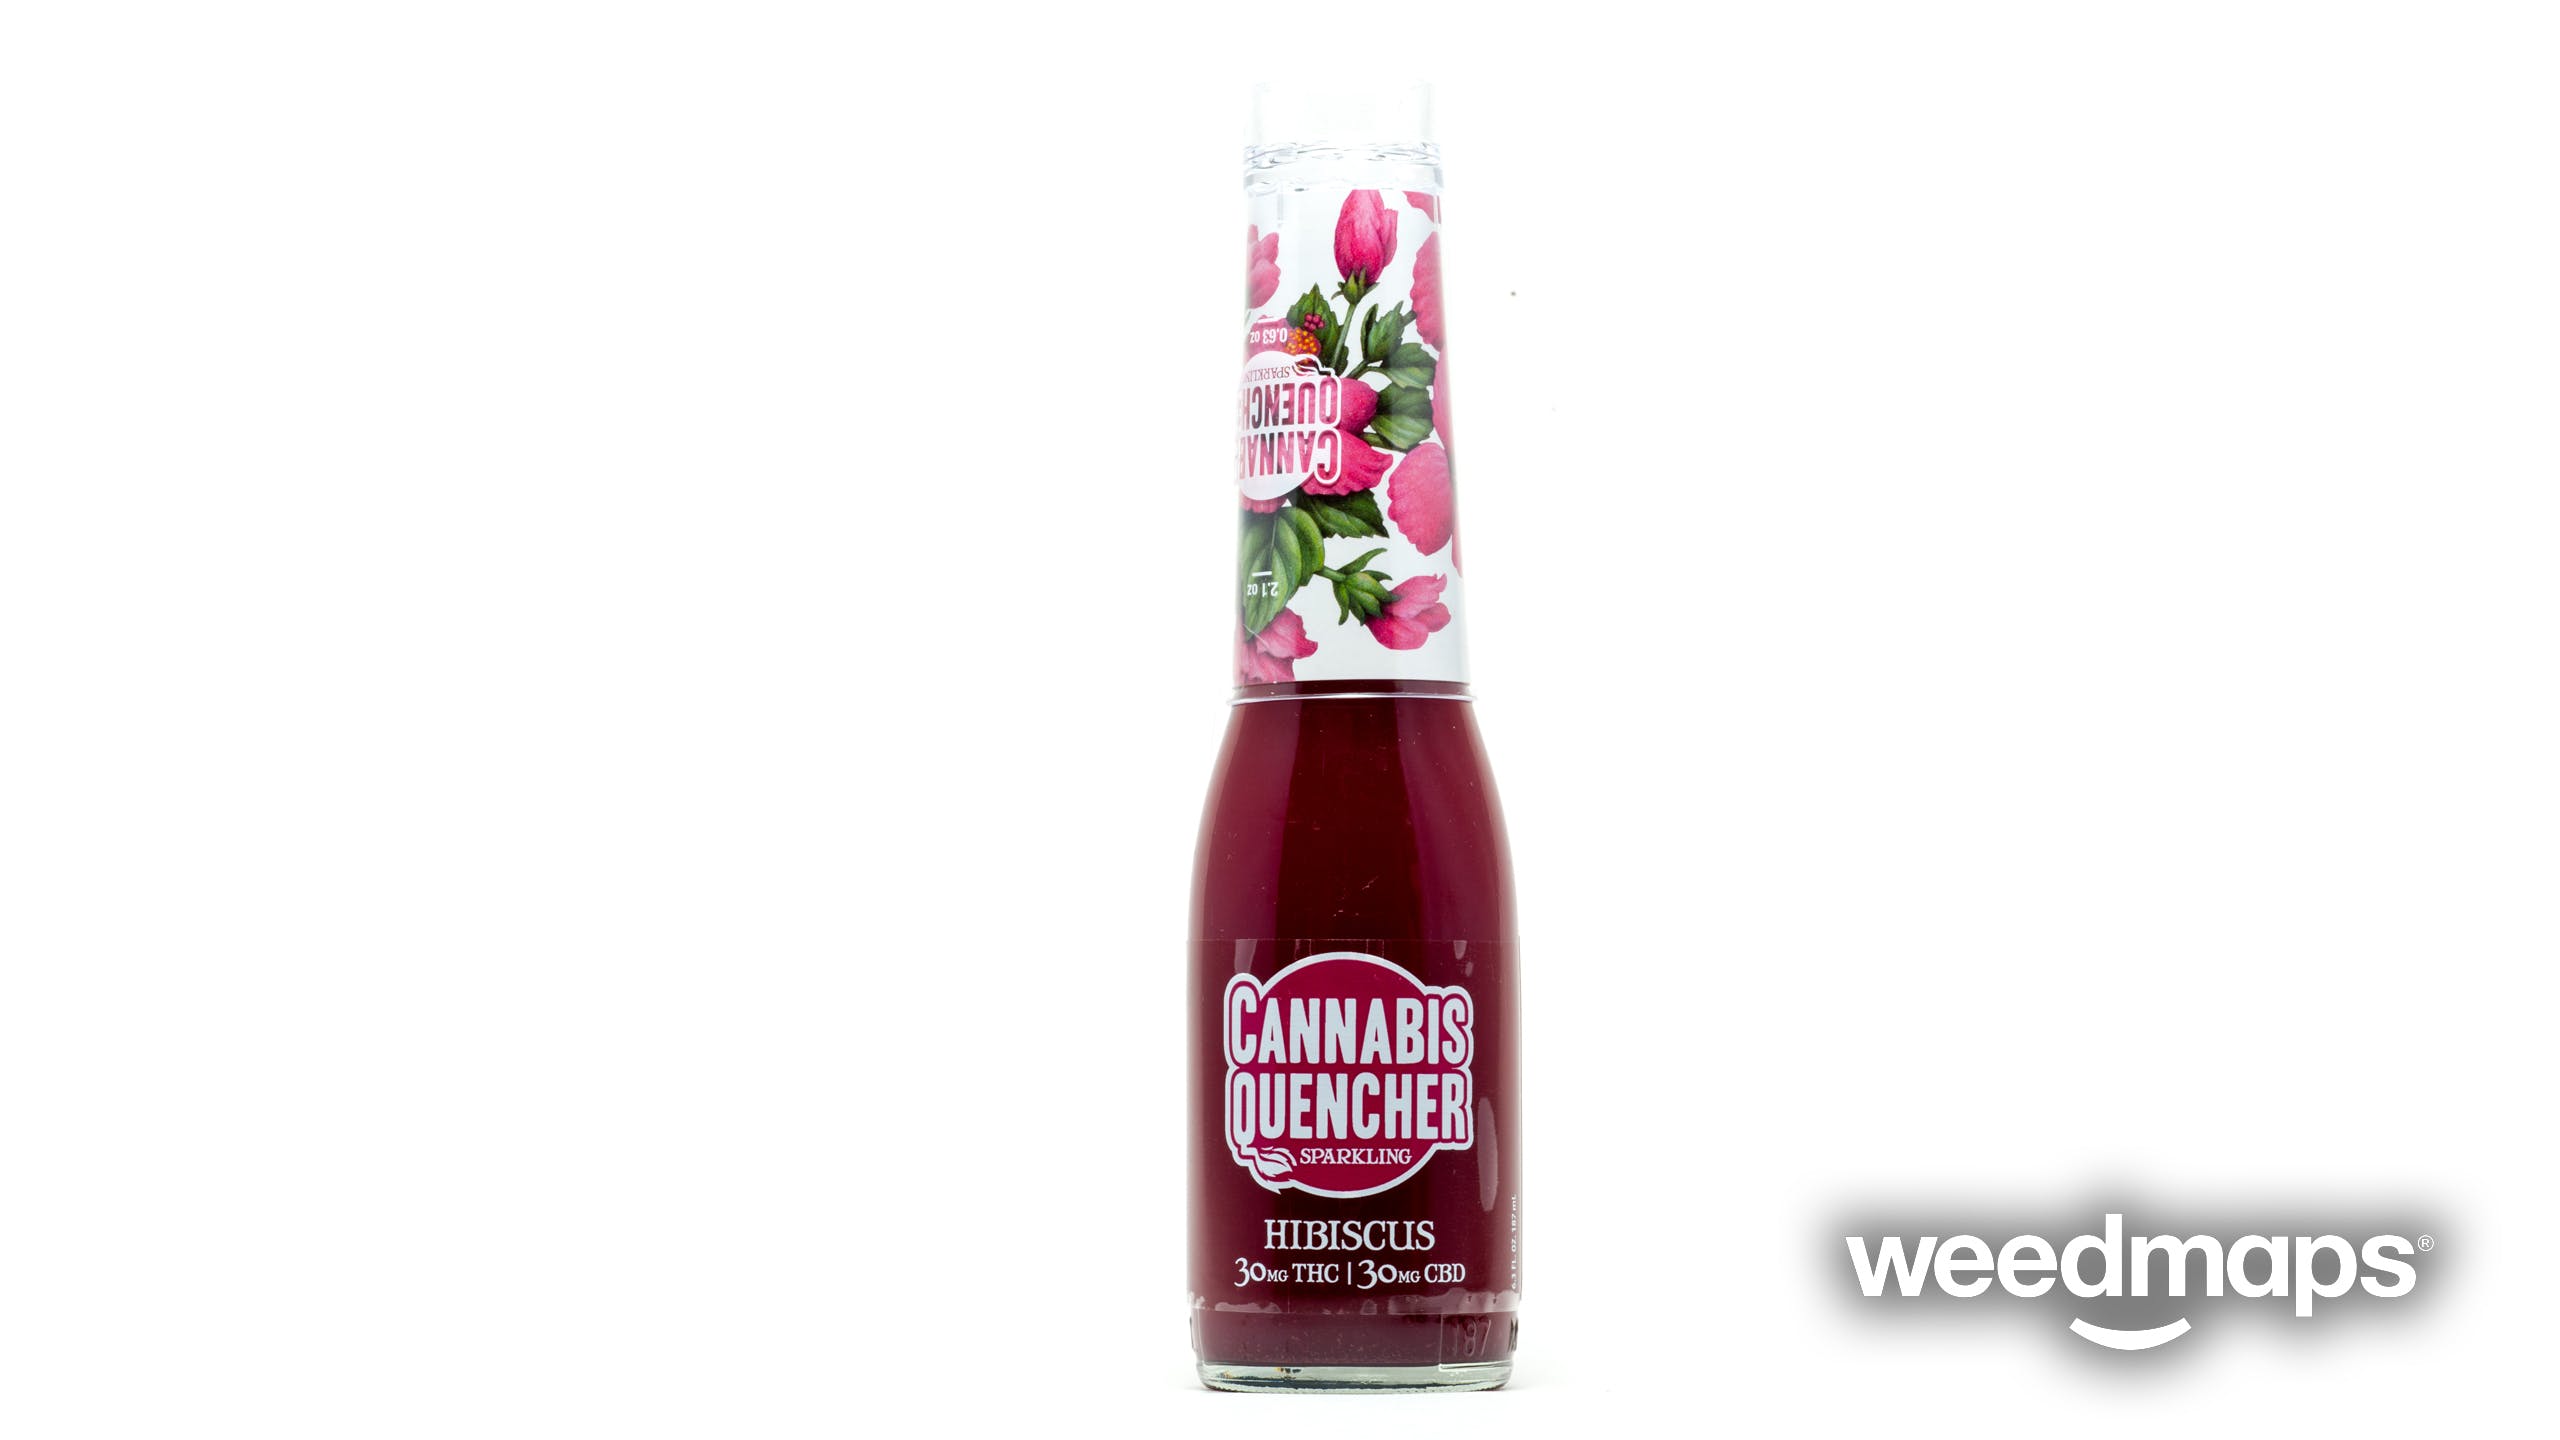 drink-evergreen-herbal-200mg-hibiscus-cannabis-quencher-sparkling